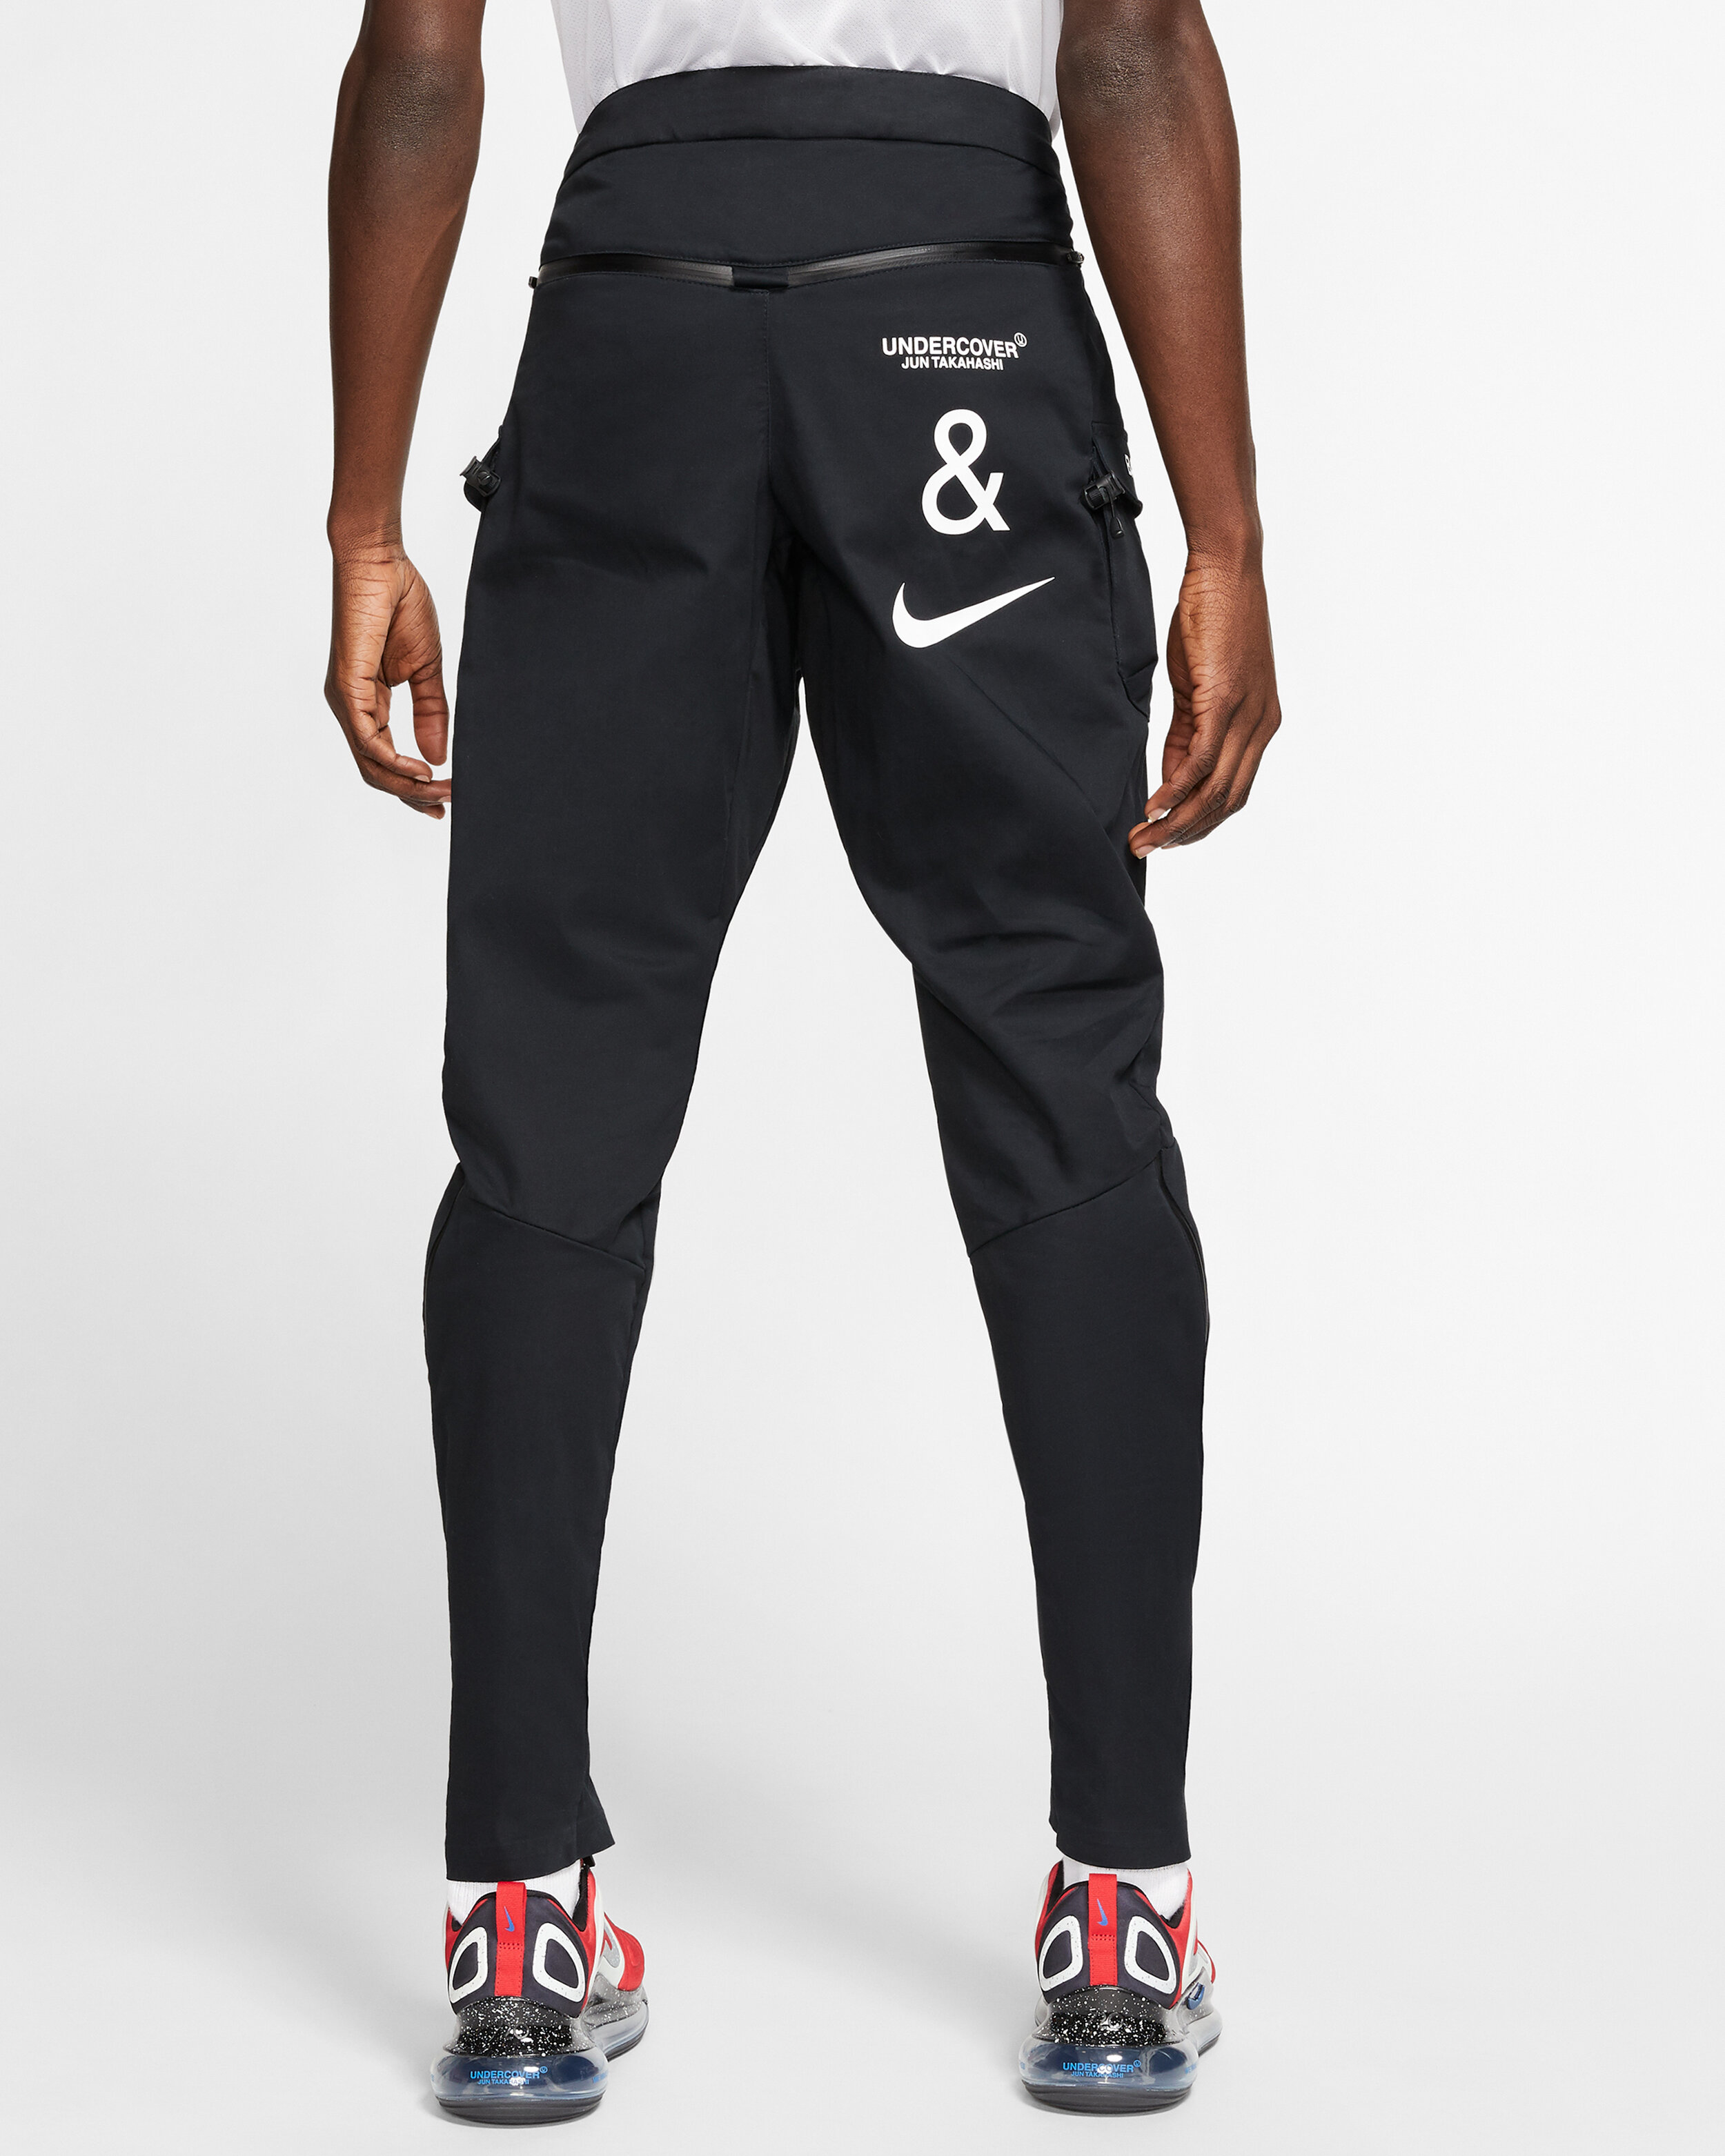 nike-x-undercover-winter-collection-84_92115.jpg